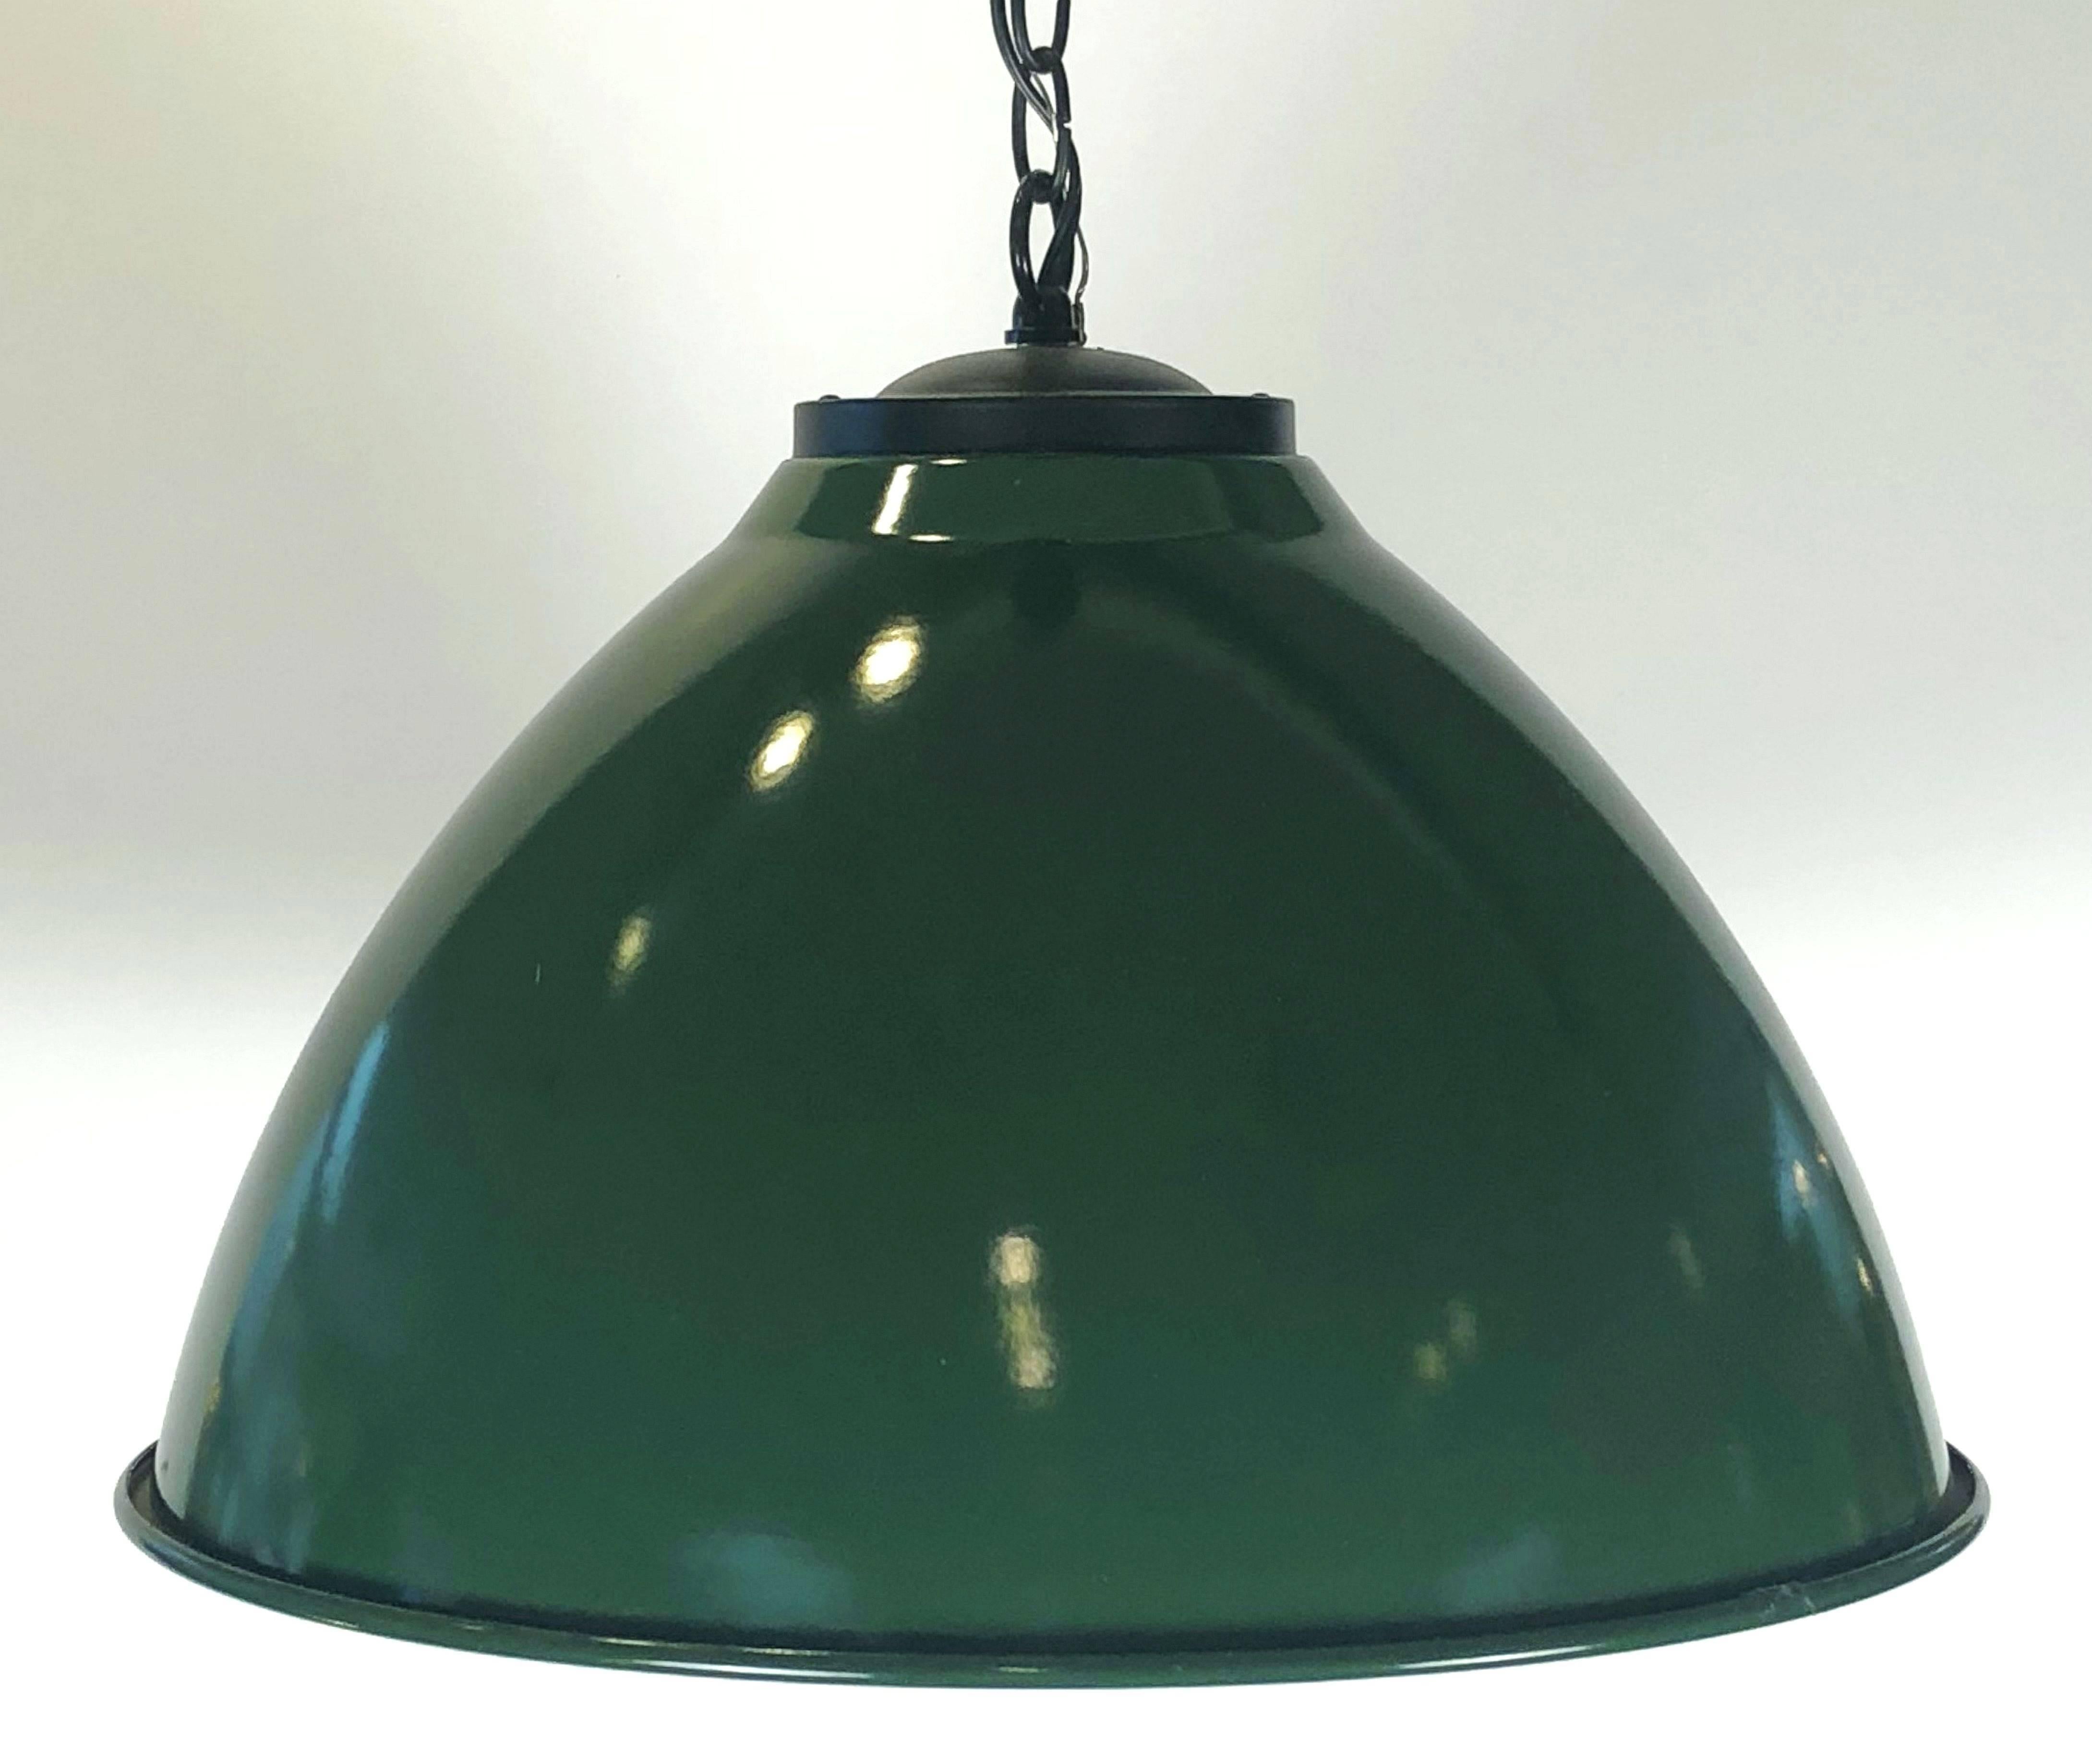 Modern Green Tole Industrial Hanging Lamps or Lanterns from England (18 1/4